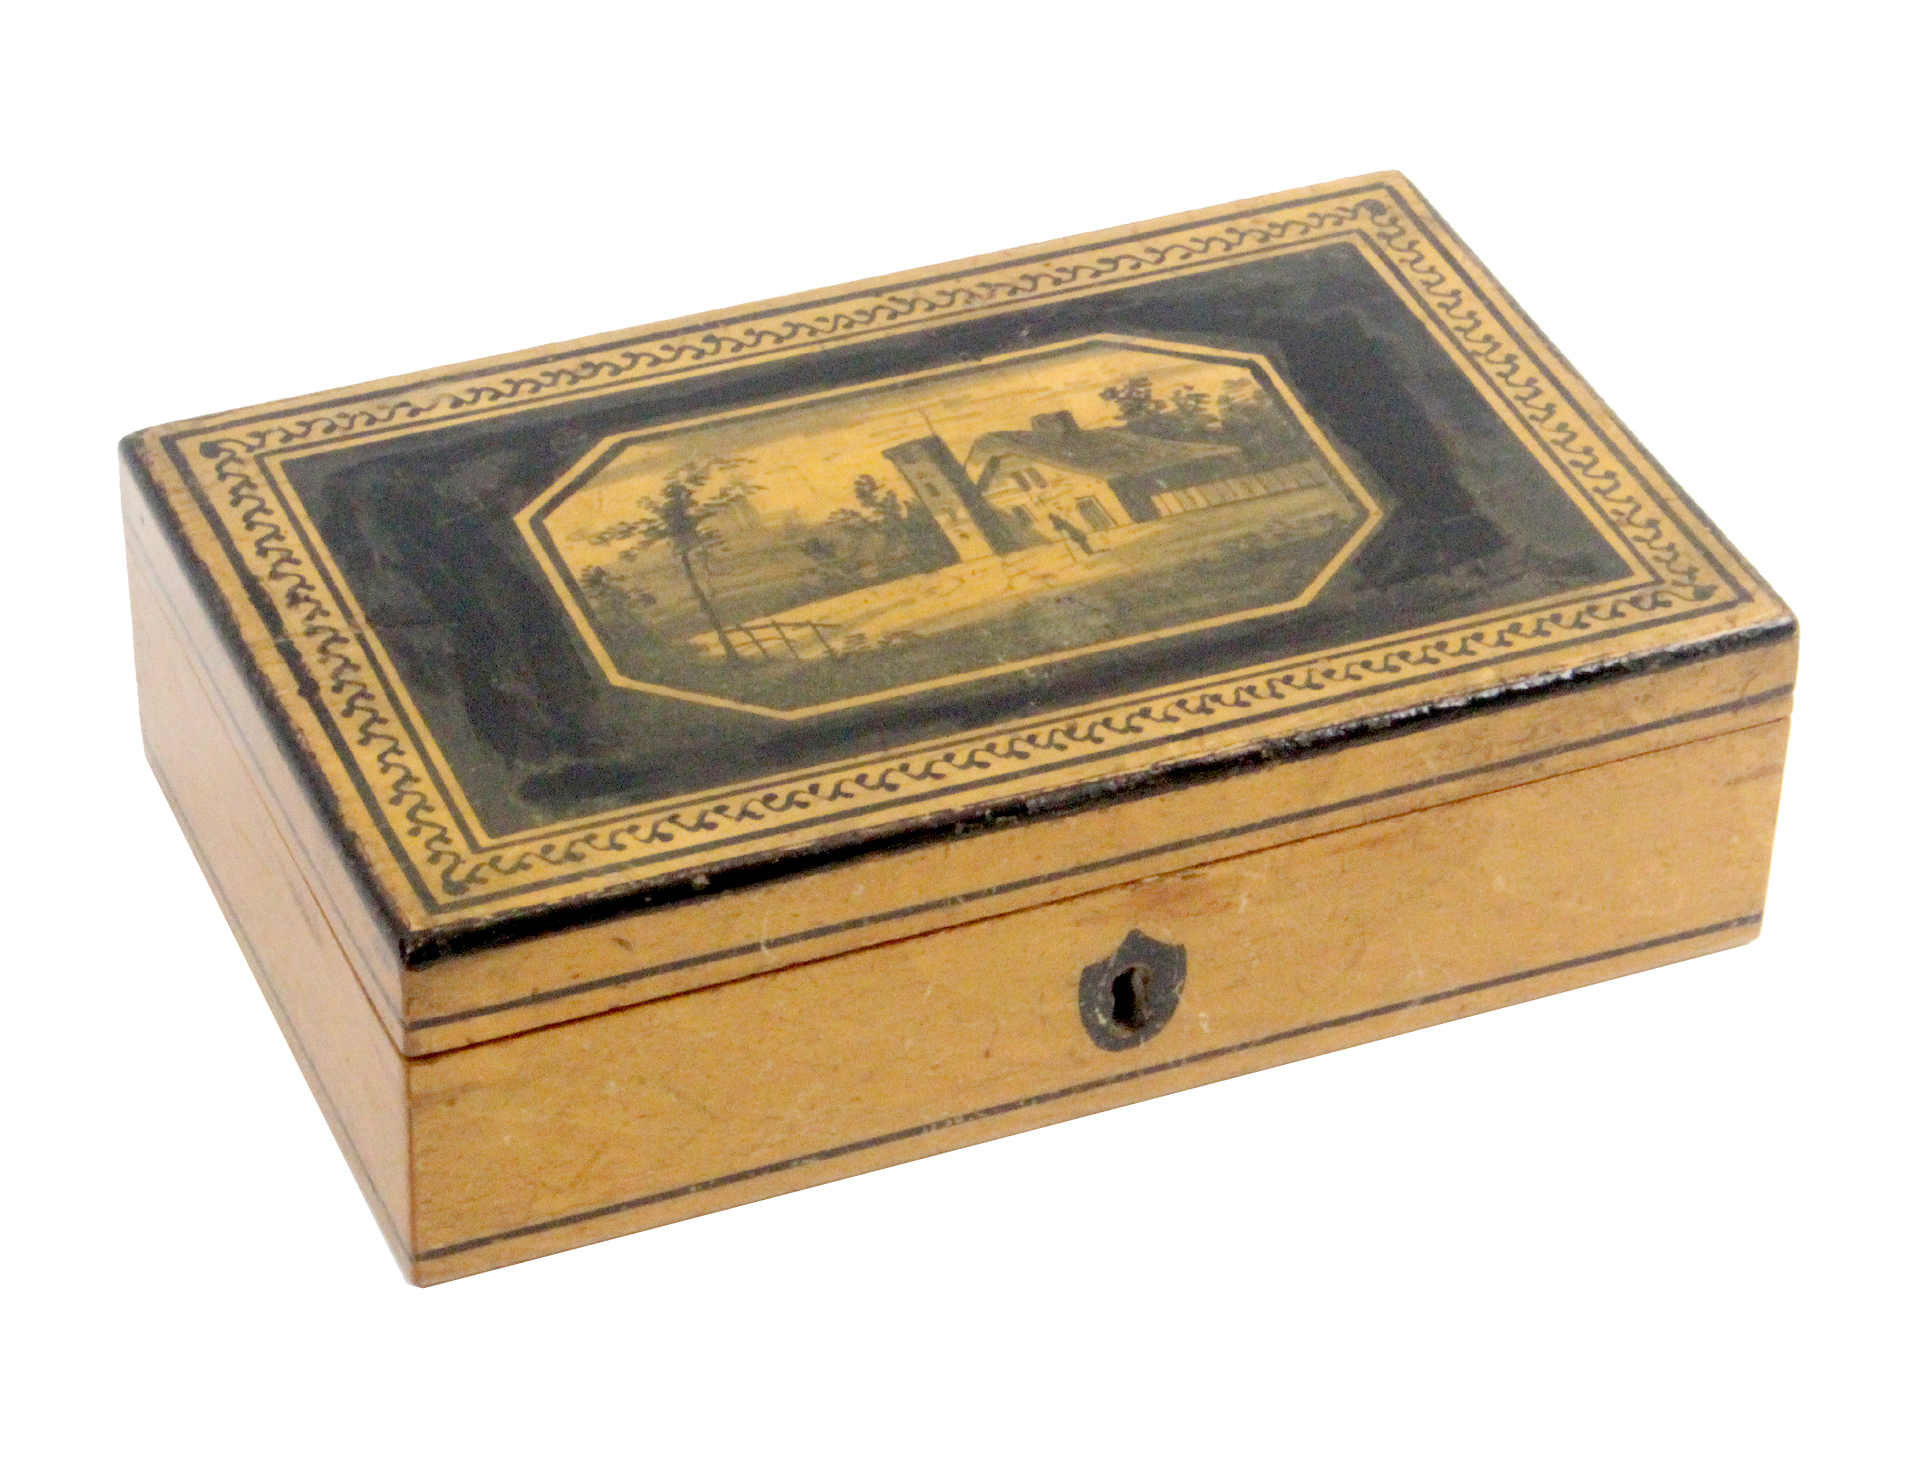 A painted Tunbridge ware whitewood rectangular box, the hinged lid with a cut corner panel painted